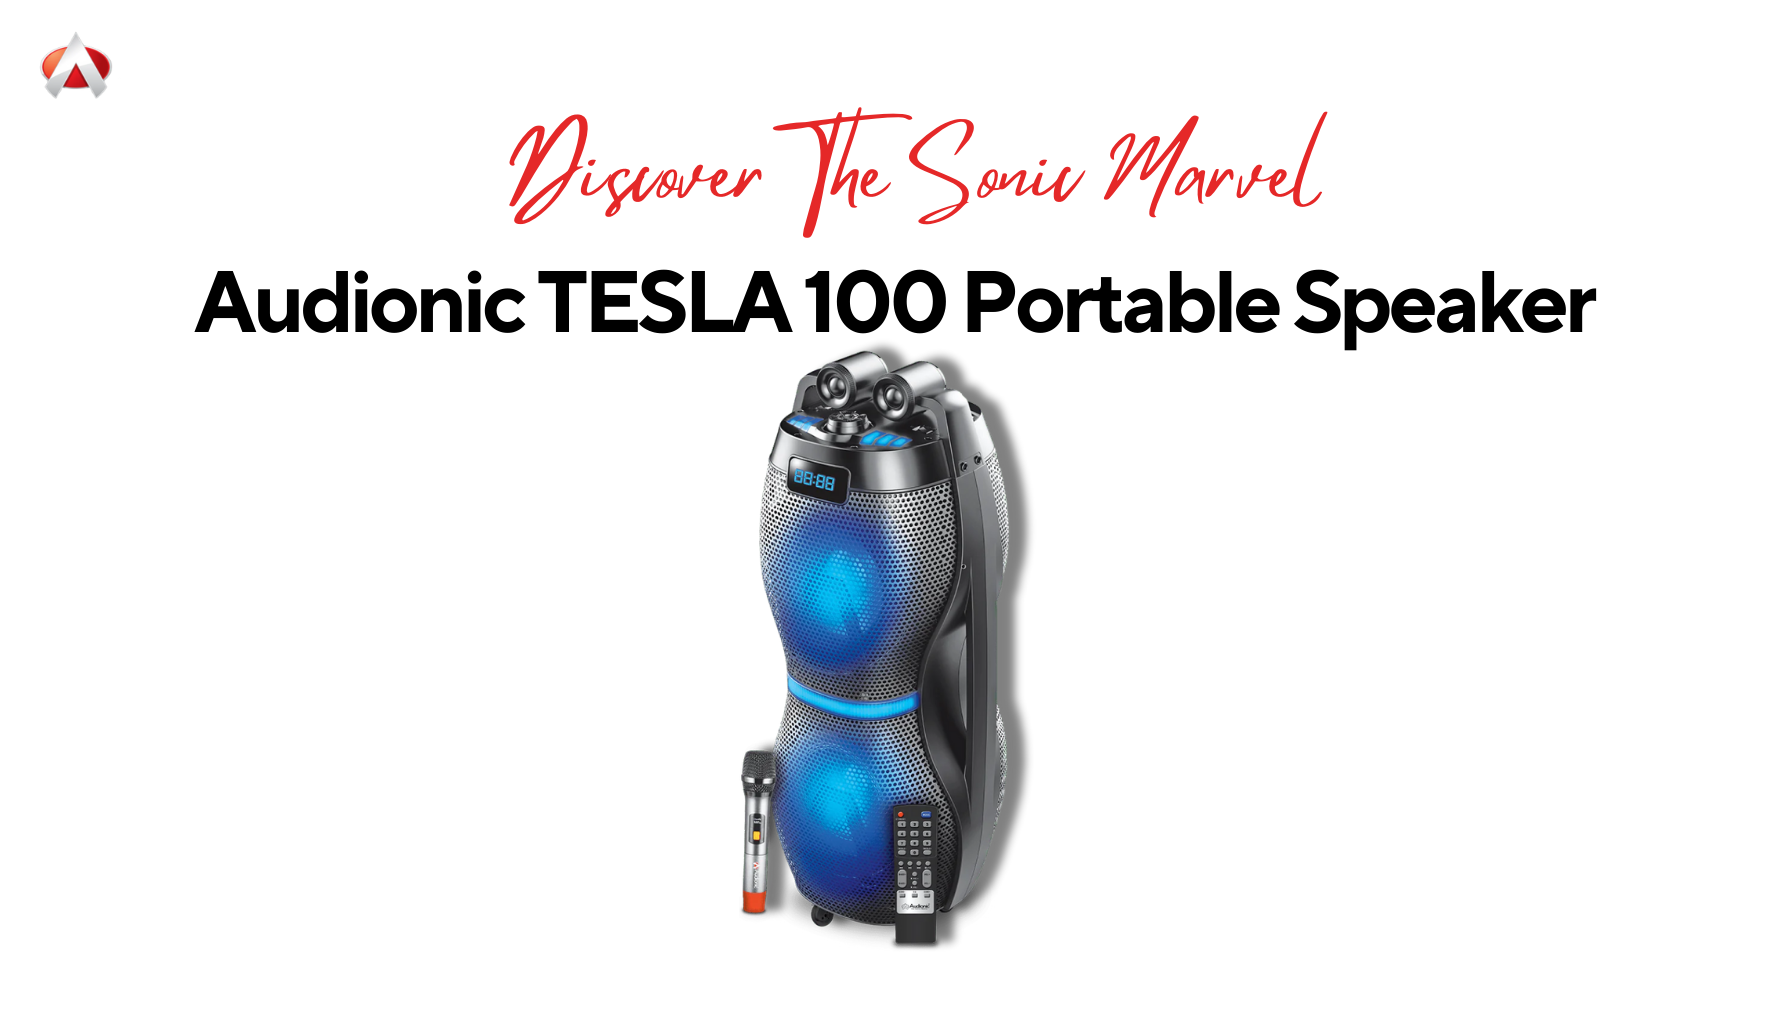 Discover The Sonic Marvel: Audionic TESLA 100 Portable Speaker at an Unbelievable Rs. 43,999 – 10% Off the Original Price!